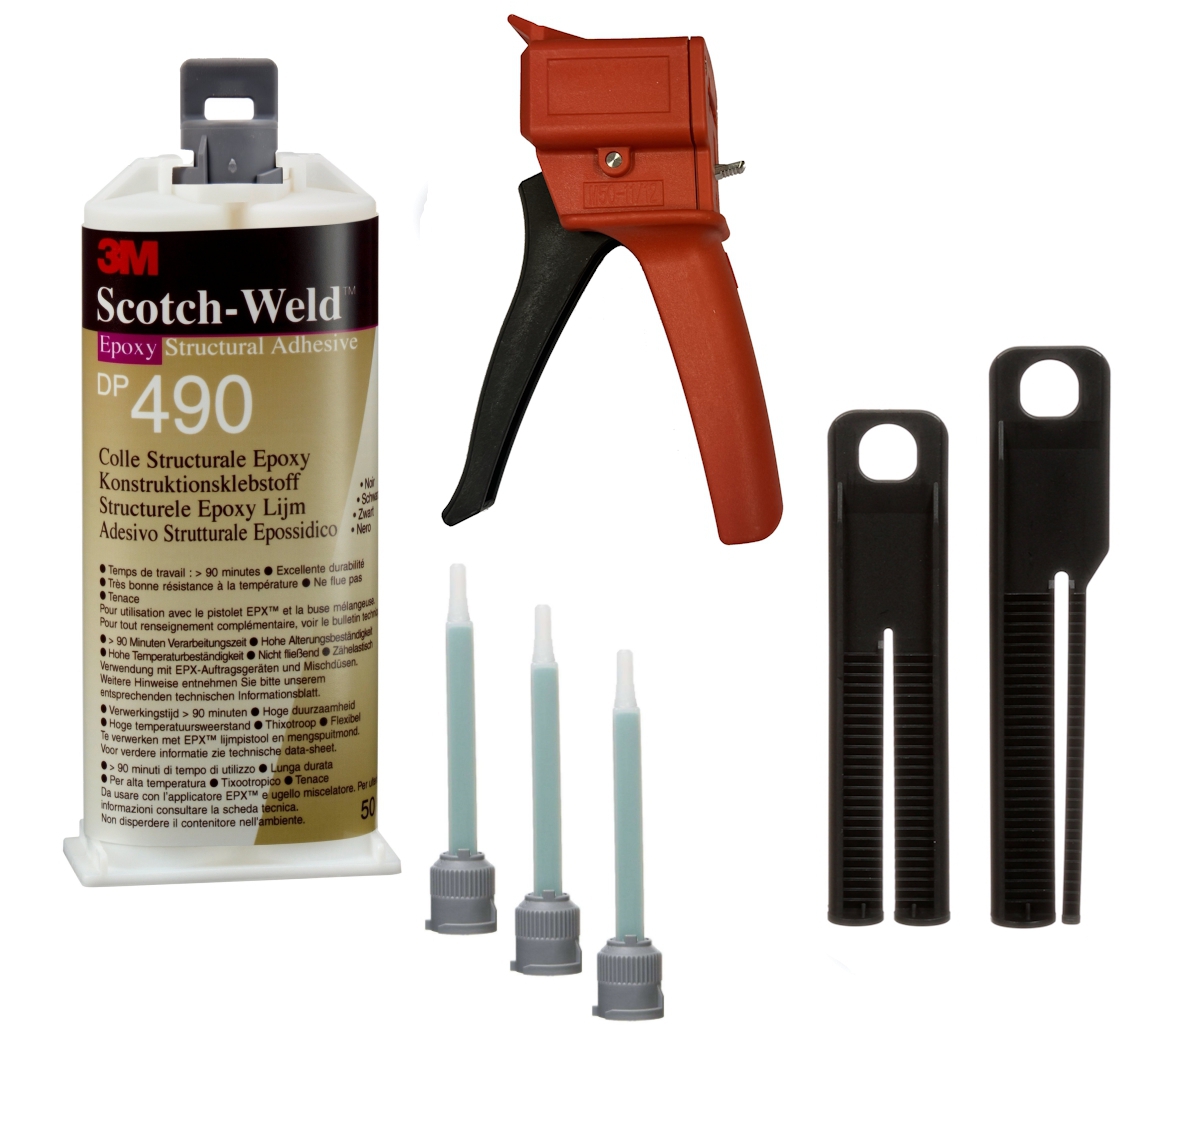 Starter set: 1x 3M Scotch-Weld 2-component construction adhesive EPX System DP490, black, 50 ml, 1x S-K-S hand tool for EPX 38 to 50 ml cartridges incl. feed piston 2:1